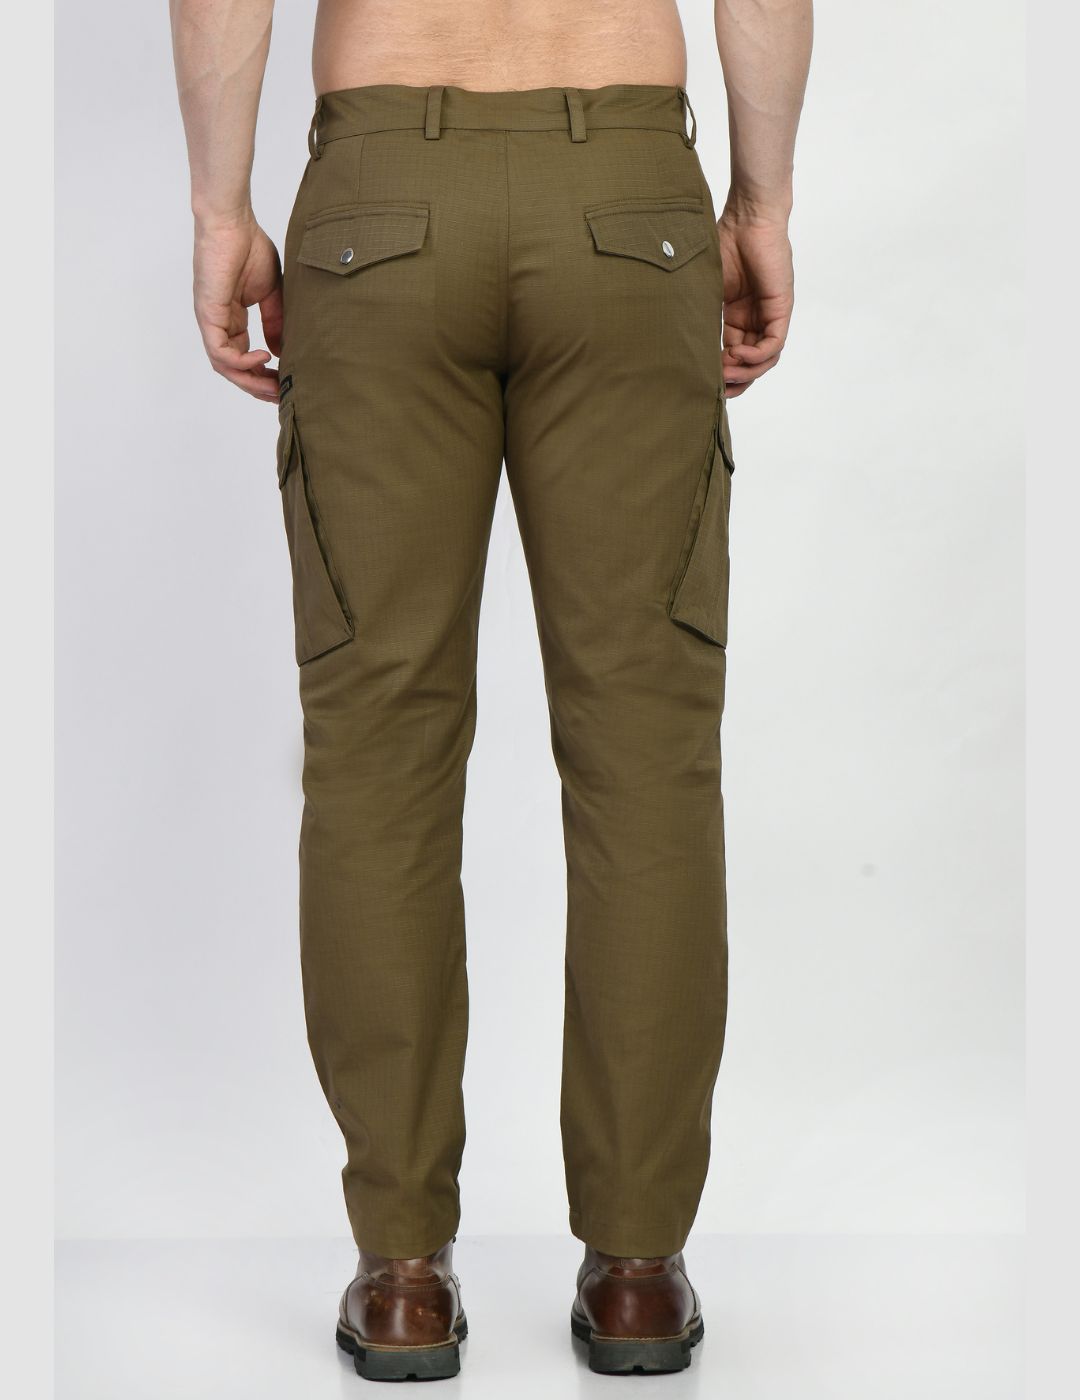 Buy tbase mens Whiskey Cotton Solid Cargo Pant for Men online India